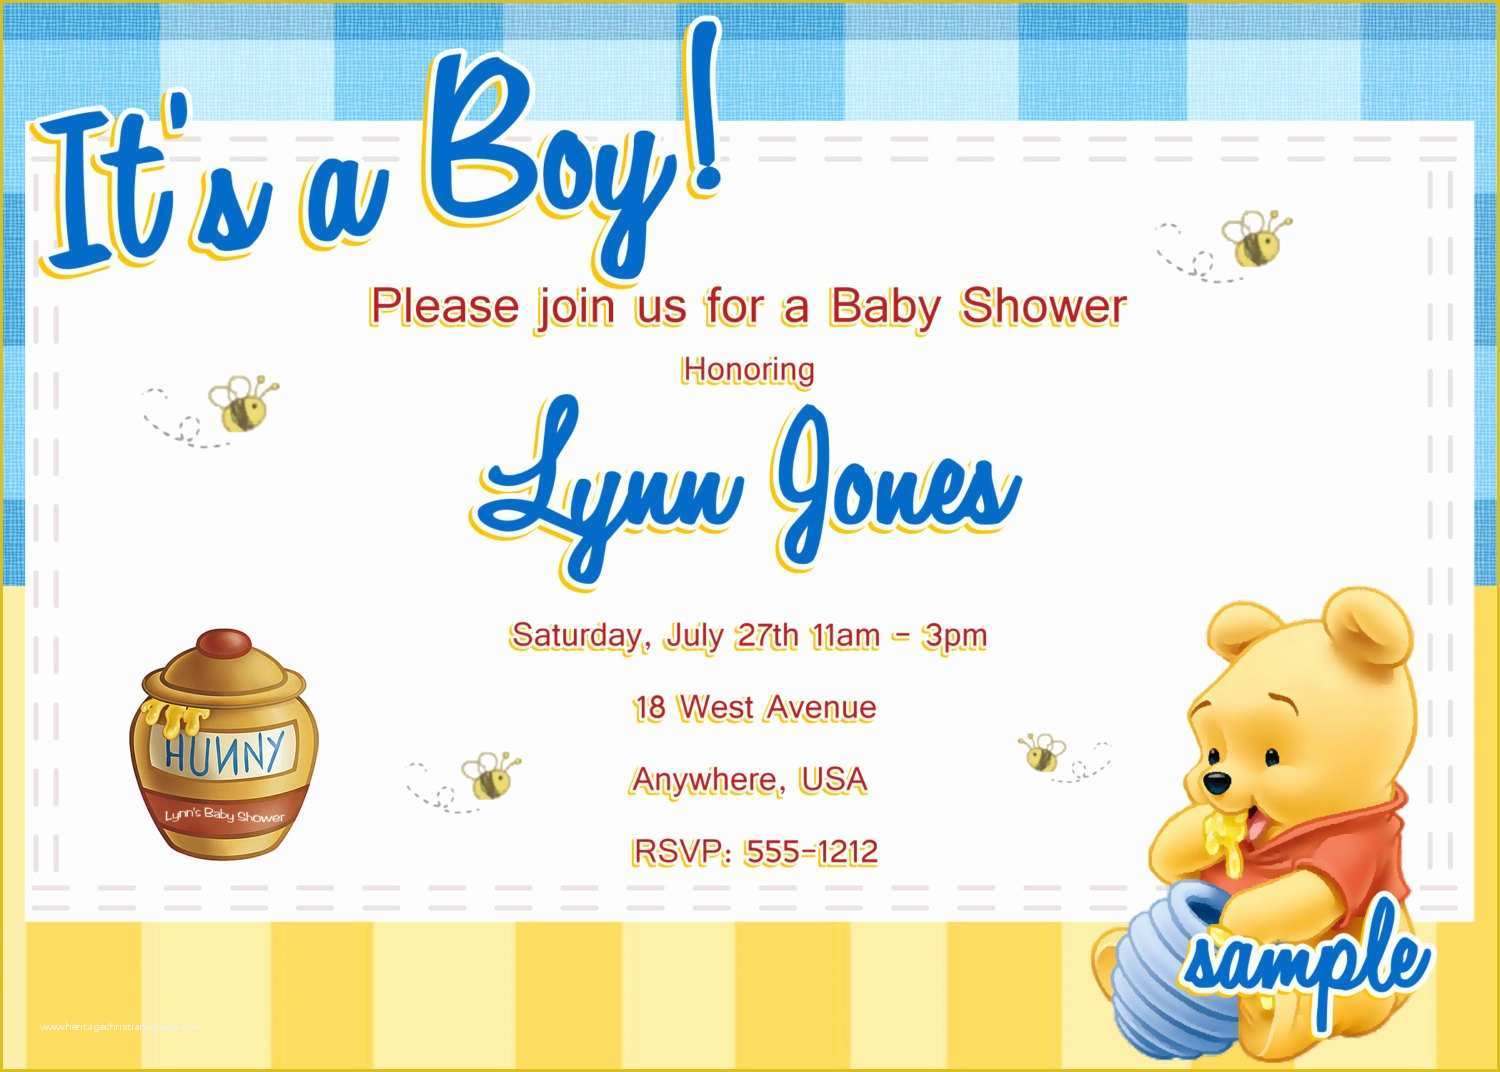 Winnie the Pooh Baby Shower Invitations Templates Free Of Winnie the Pooh Baby Shower Invitations Printable Card